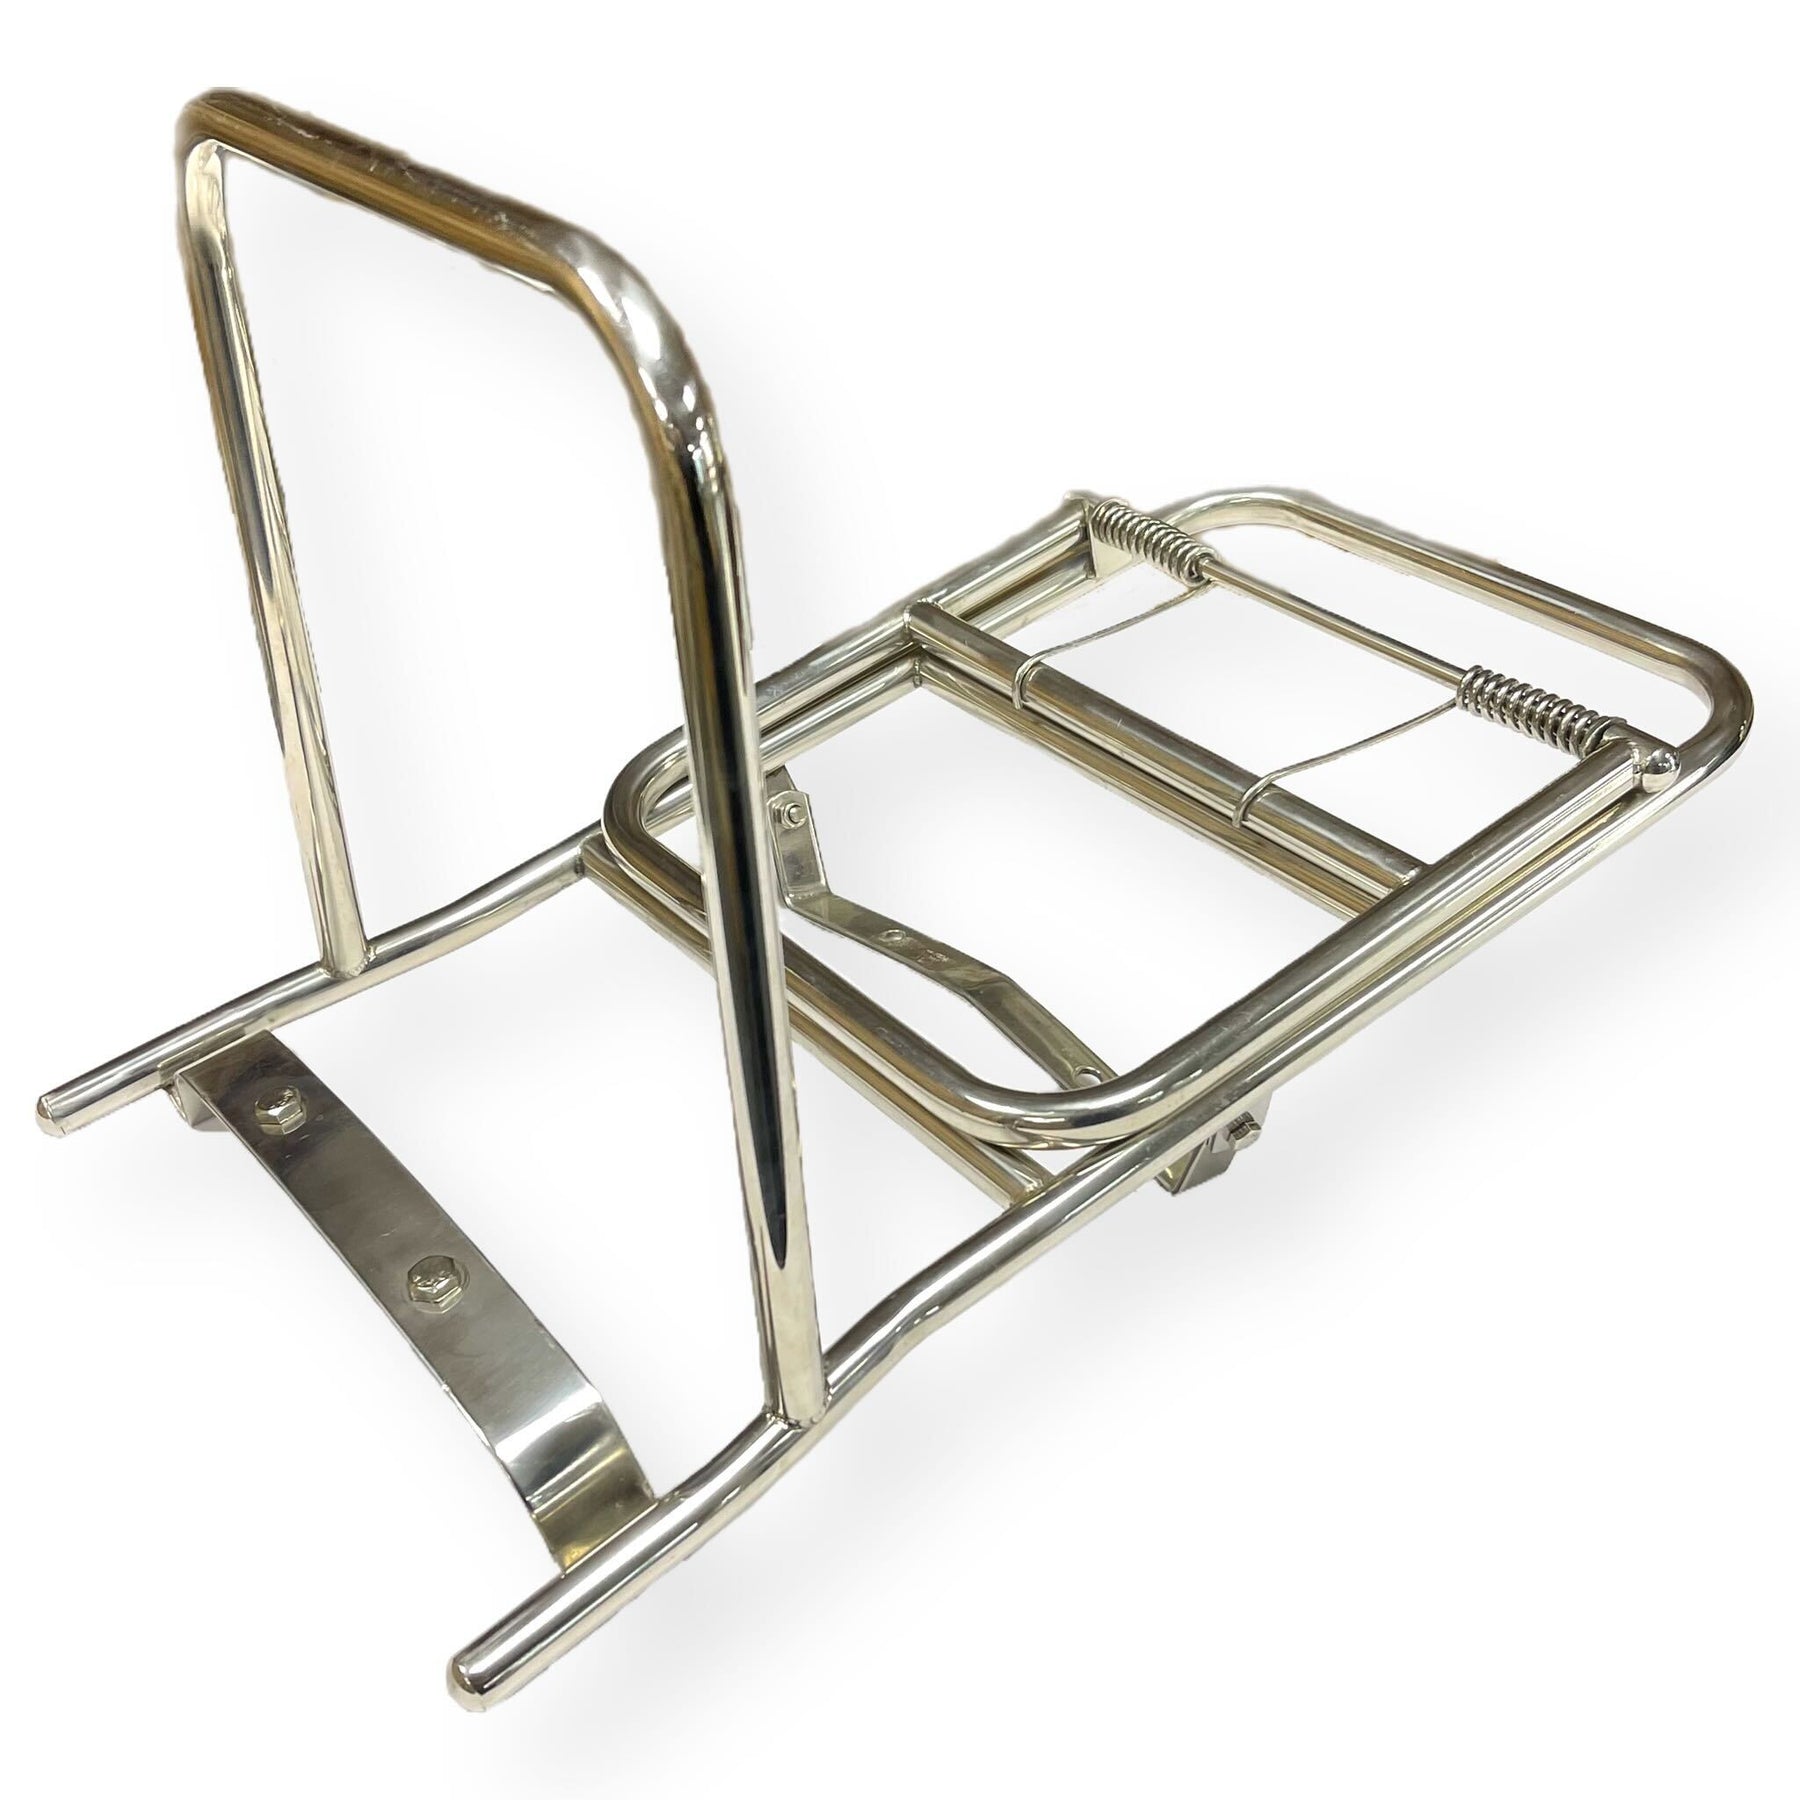 Scomadi Royal Alloy Madrid Rear Carrier - Polished Stainless Steel